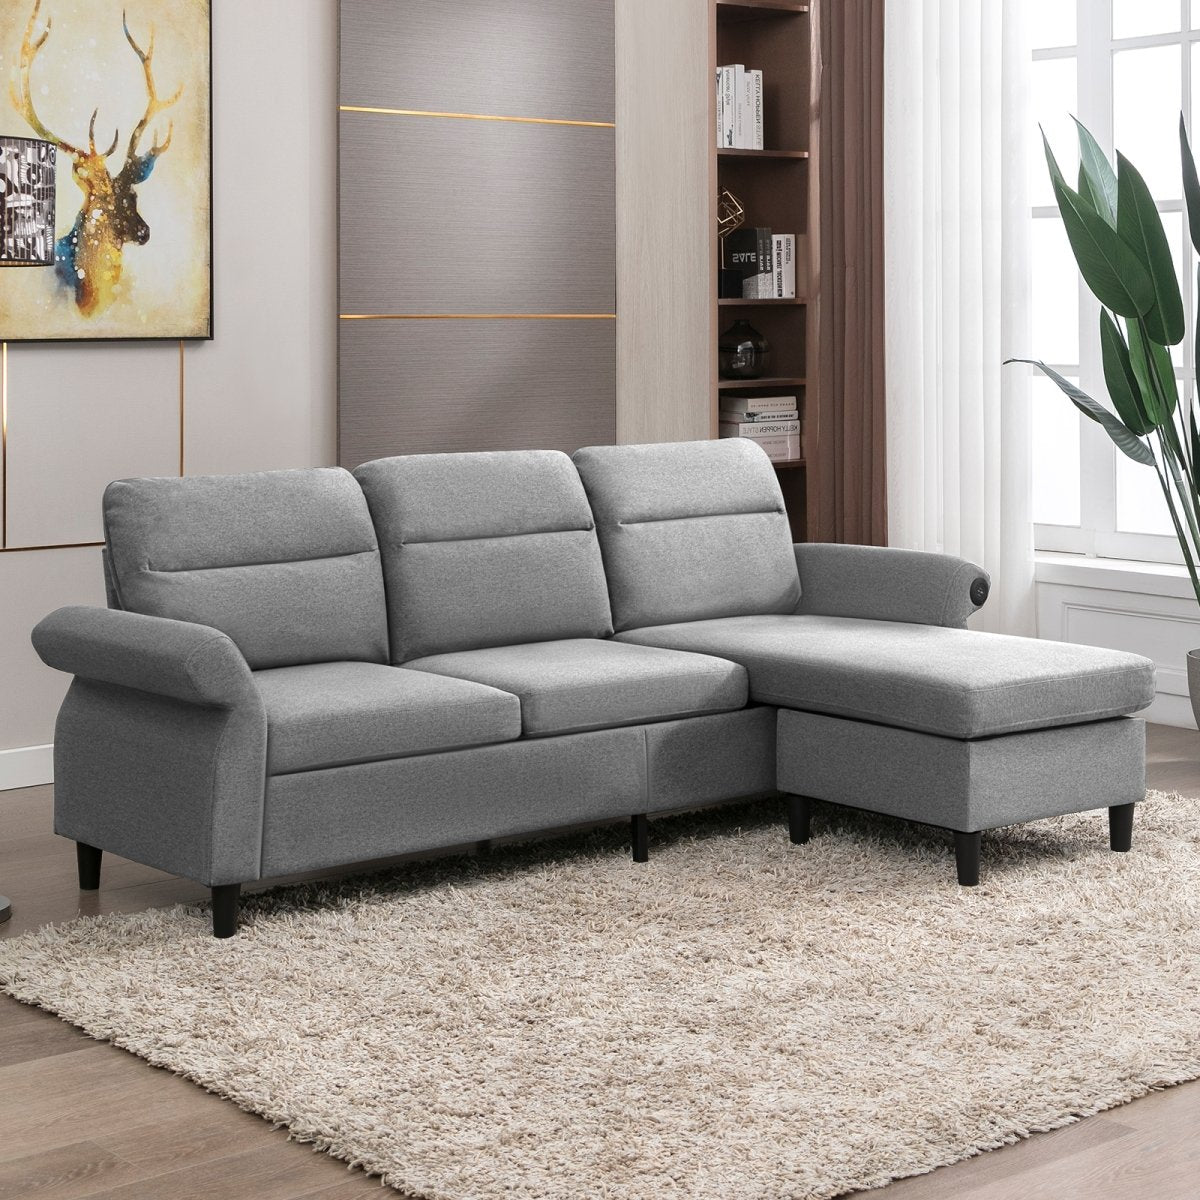 Convertible Sectional Sofa | 3 Seats Couch with USB Ports and Adjustable Armrest - Mjkonesectional sofa